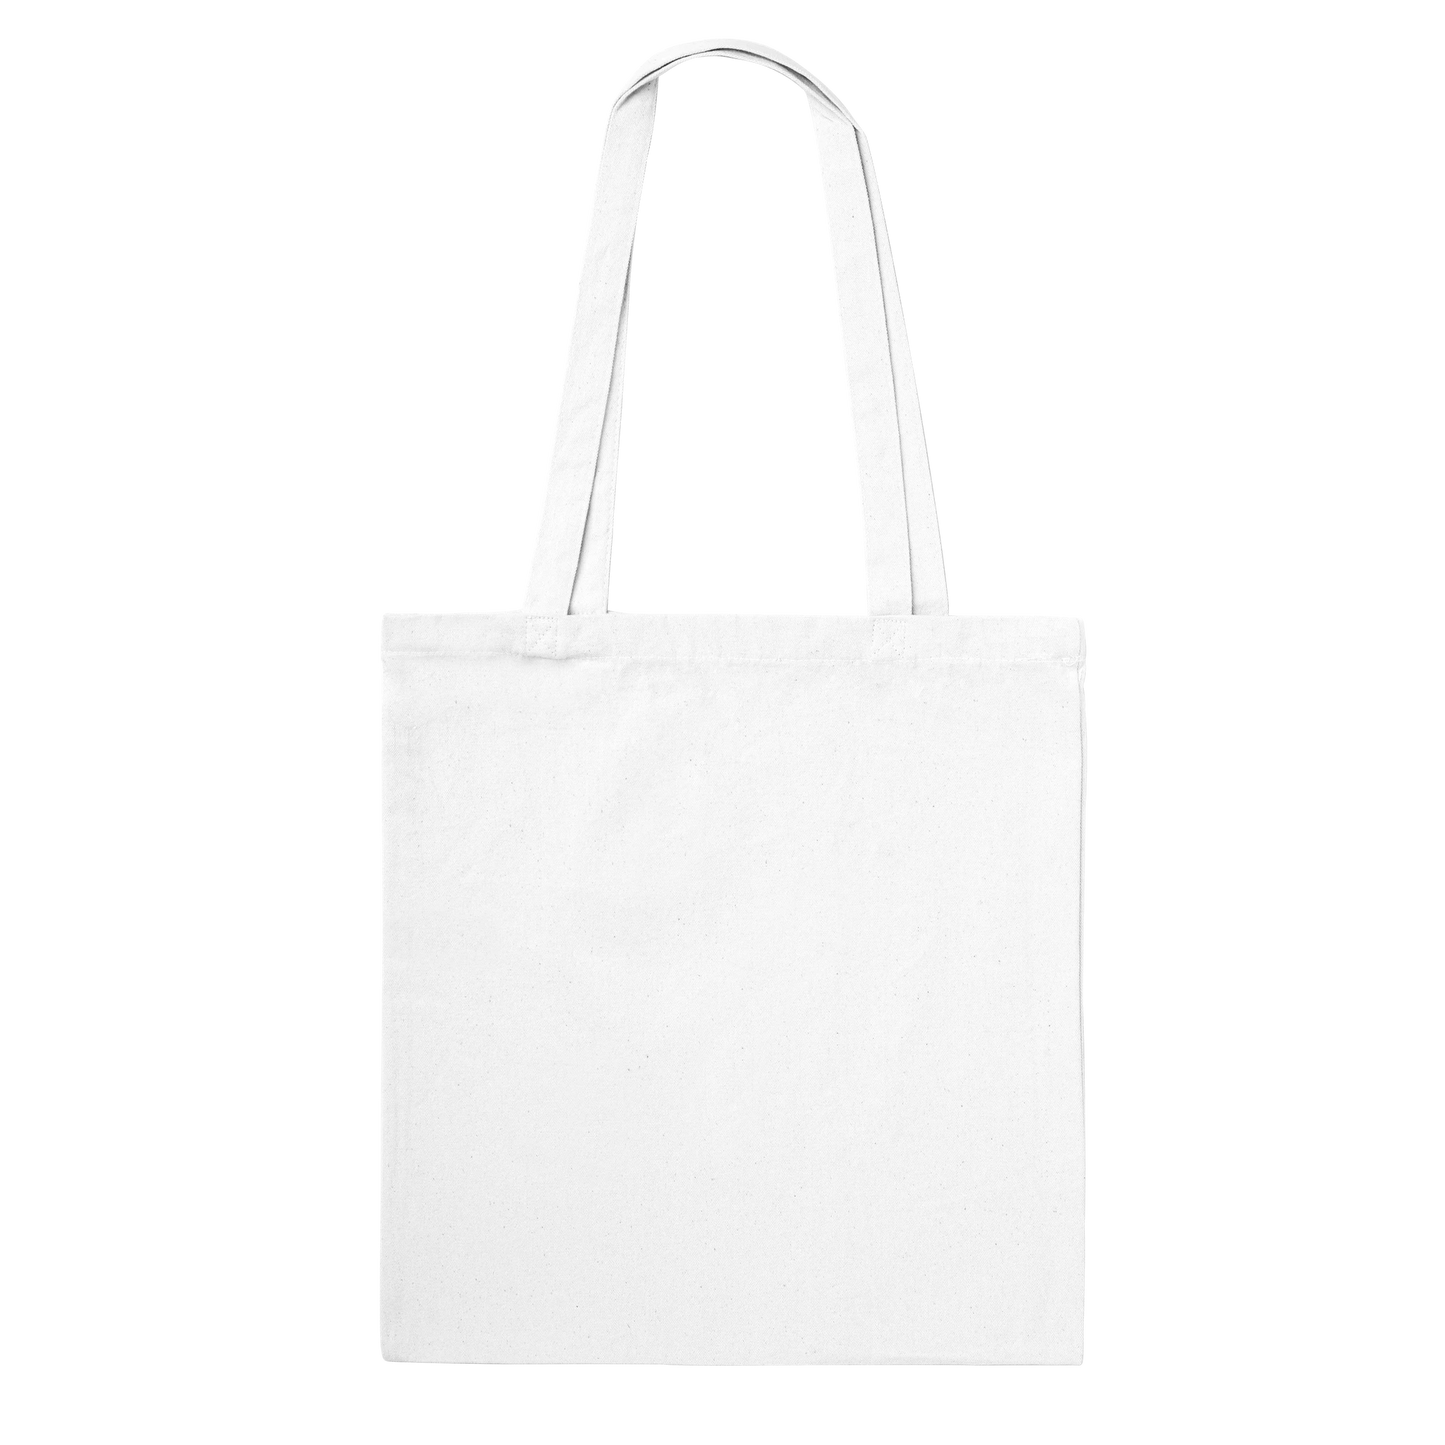 Better Days Ahead | Classic Tote Bag